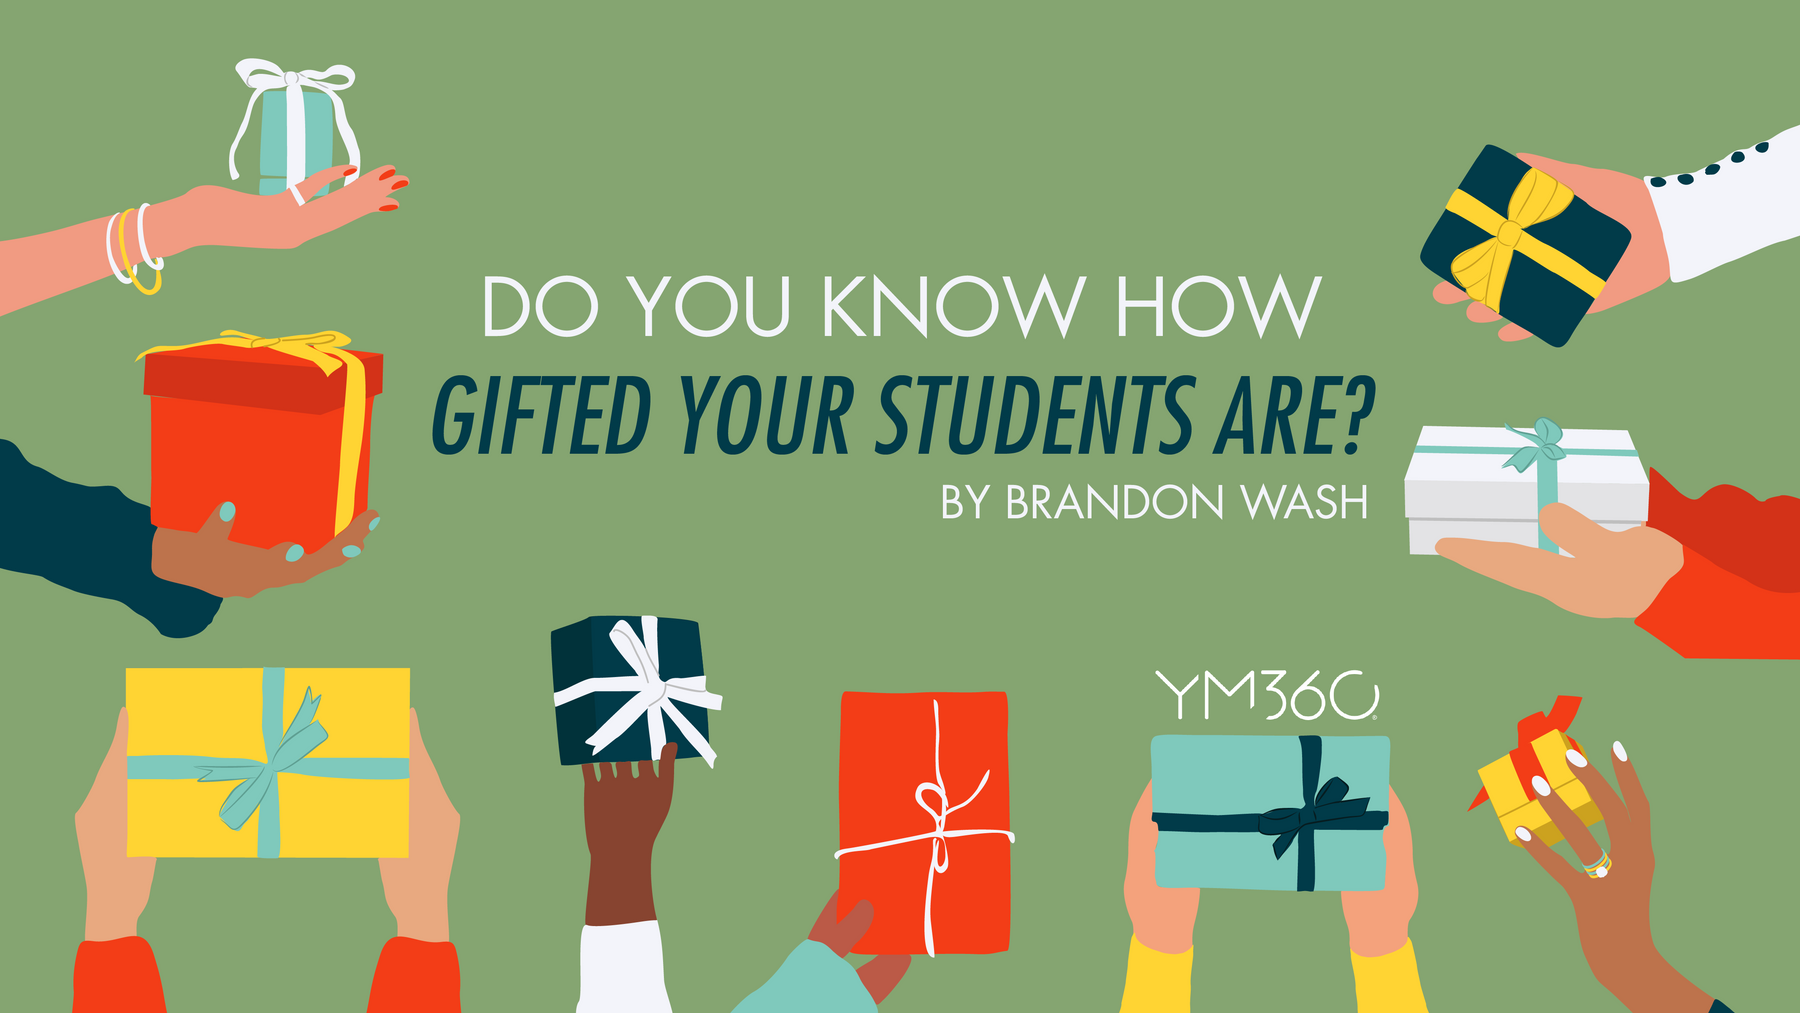 Do You Know How Gifted Your Students Are?